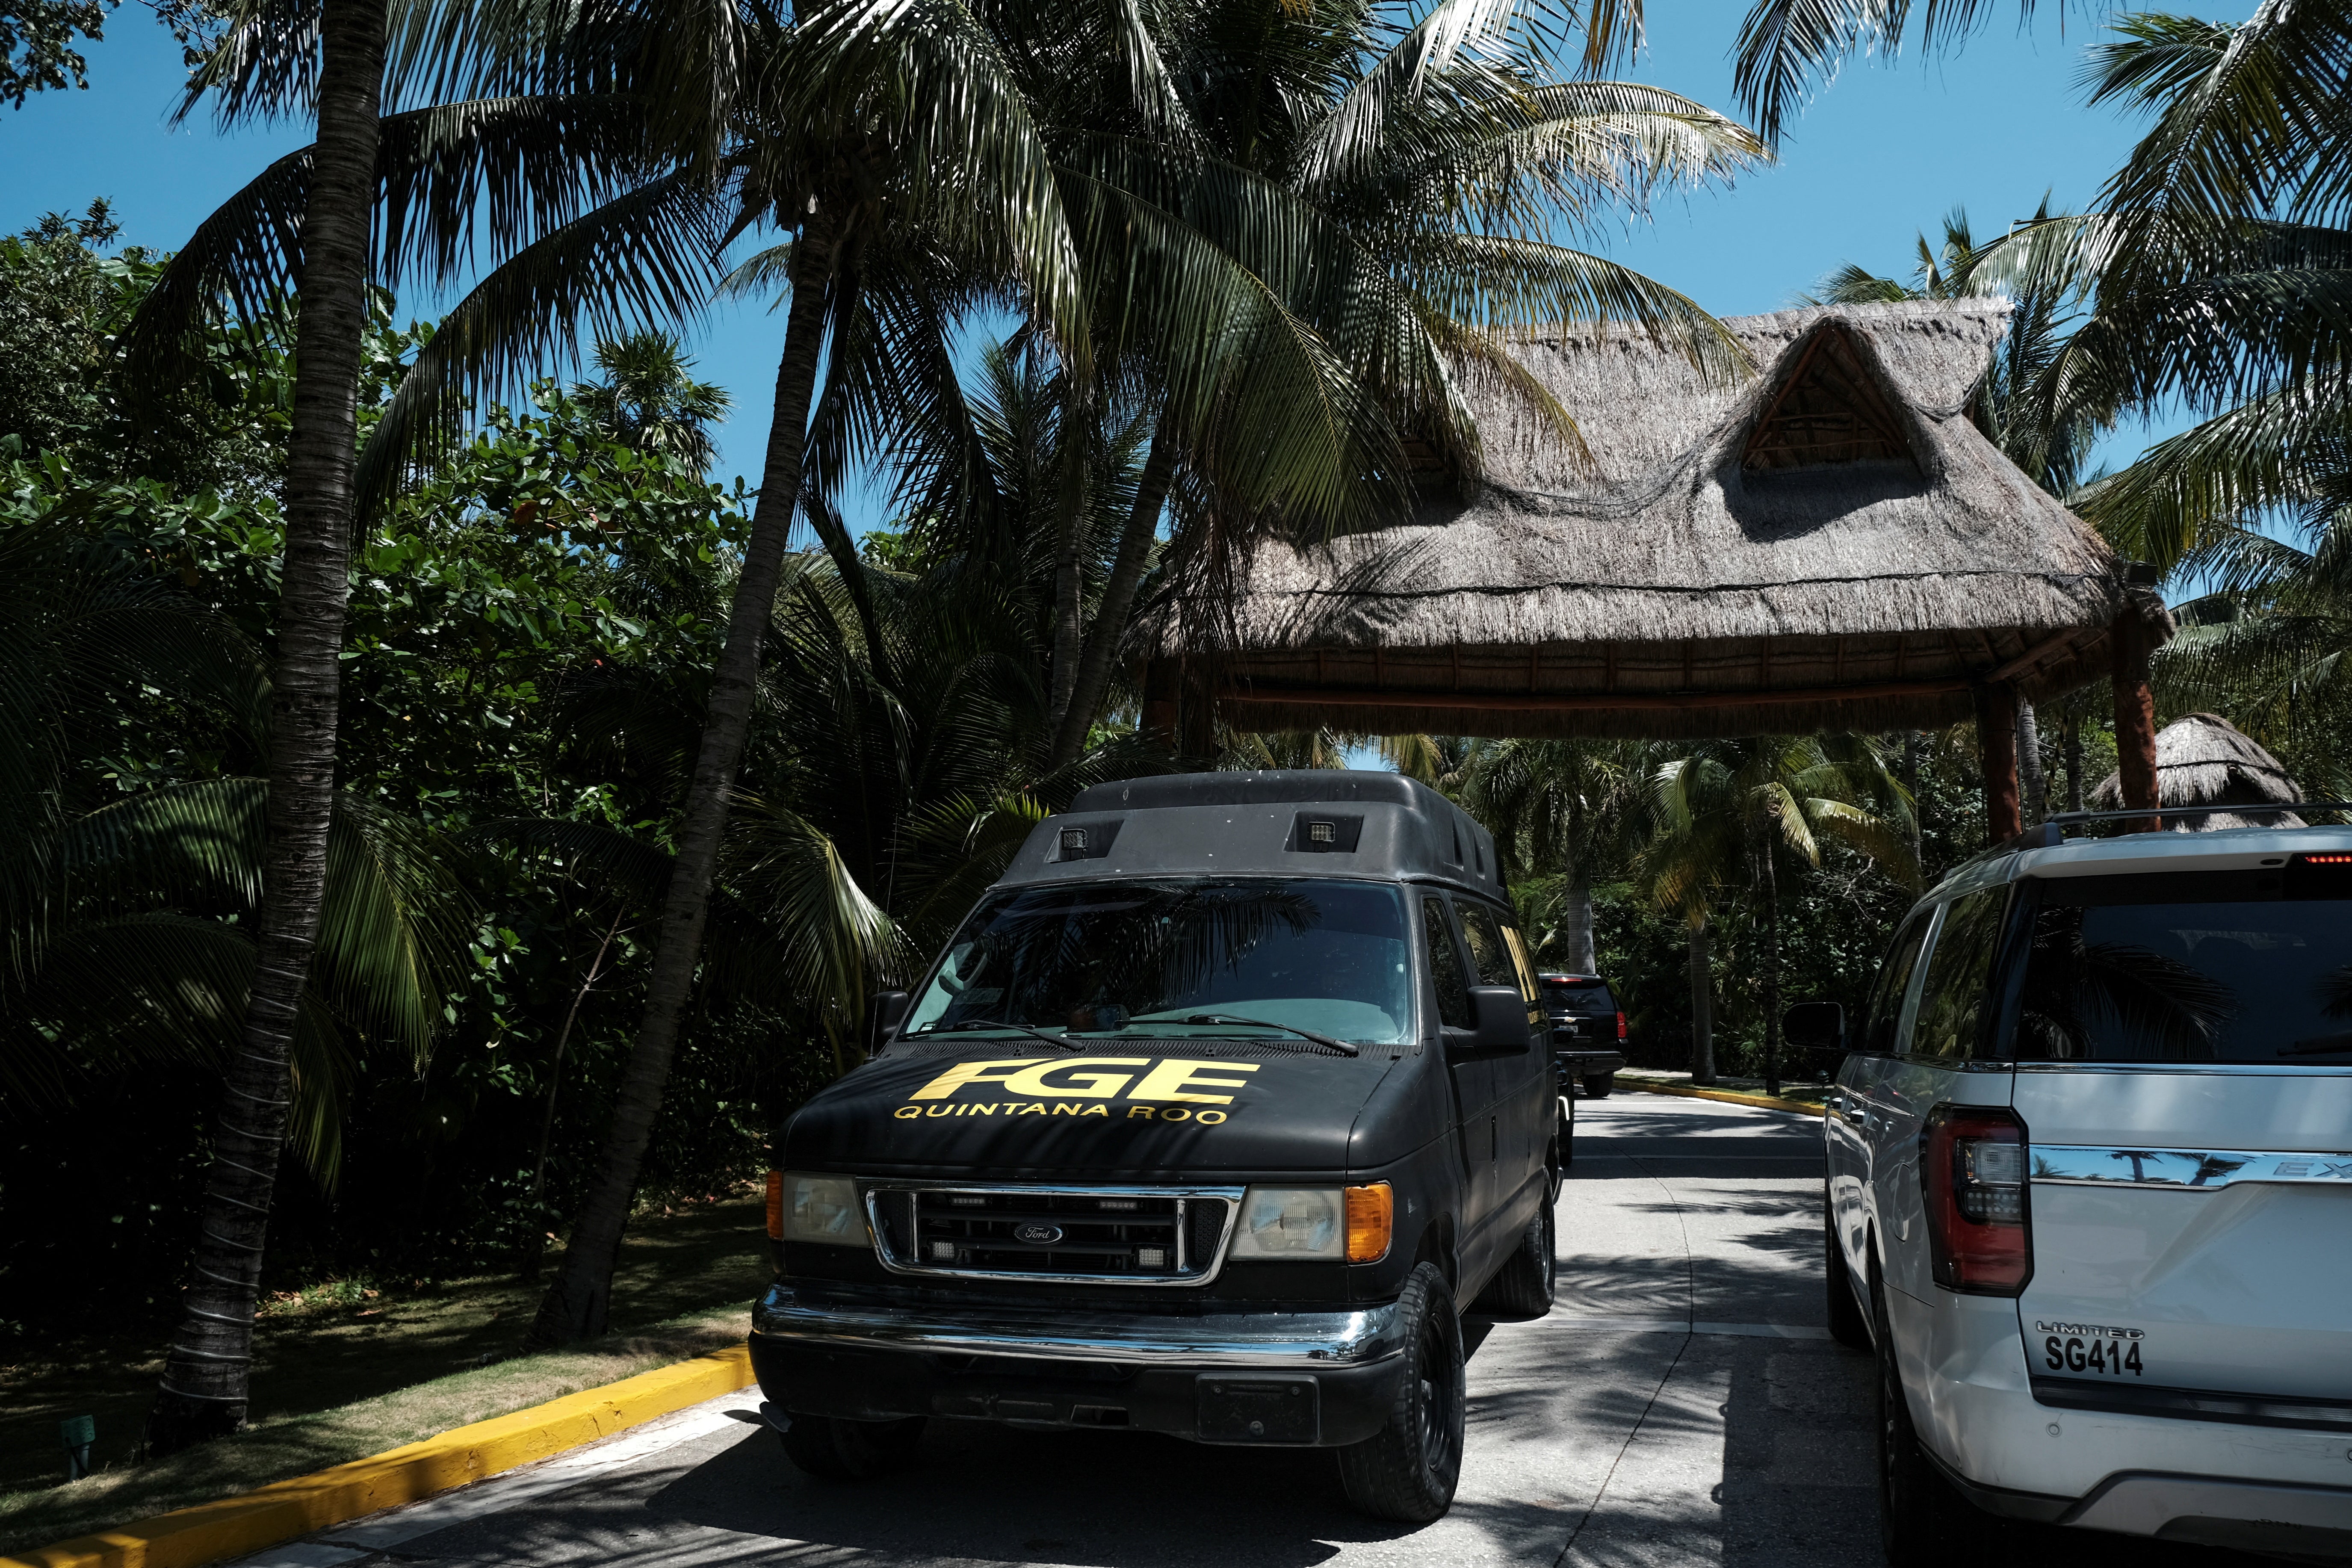 4 killed in beach shooting at Mexico vacation mecca